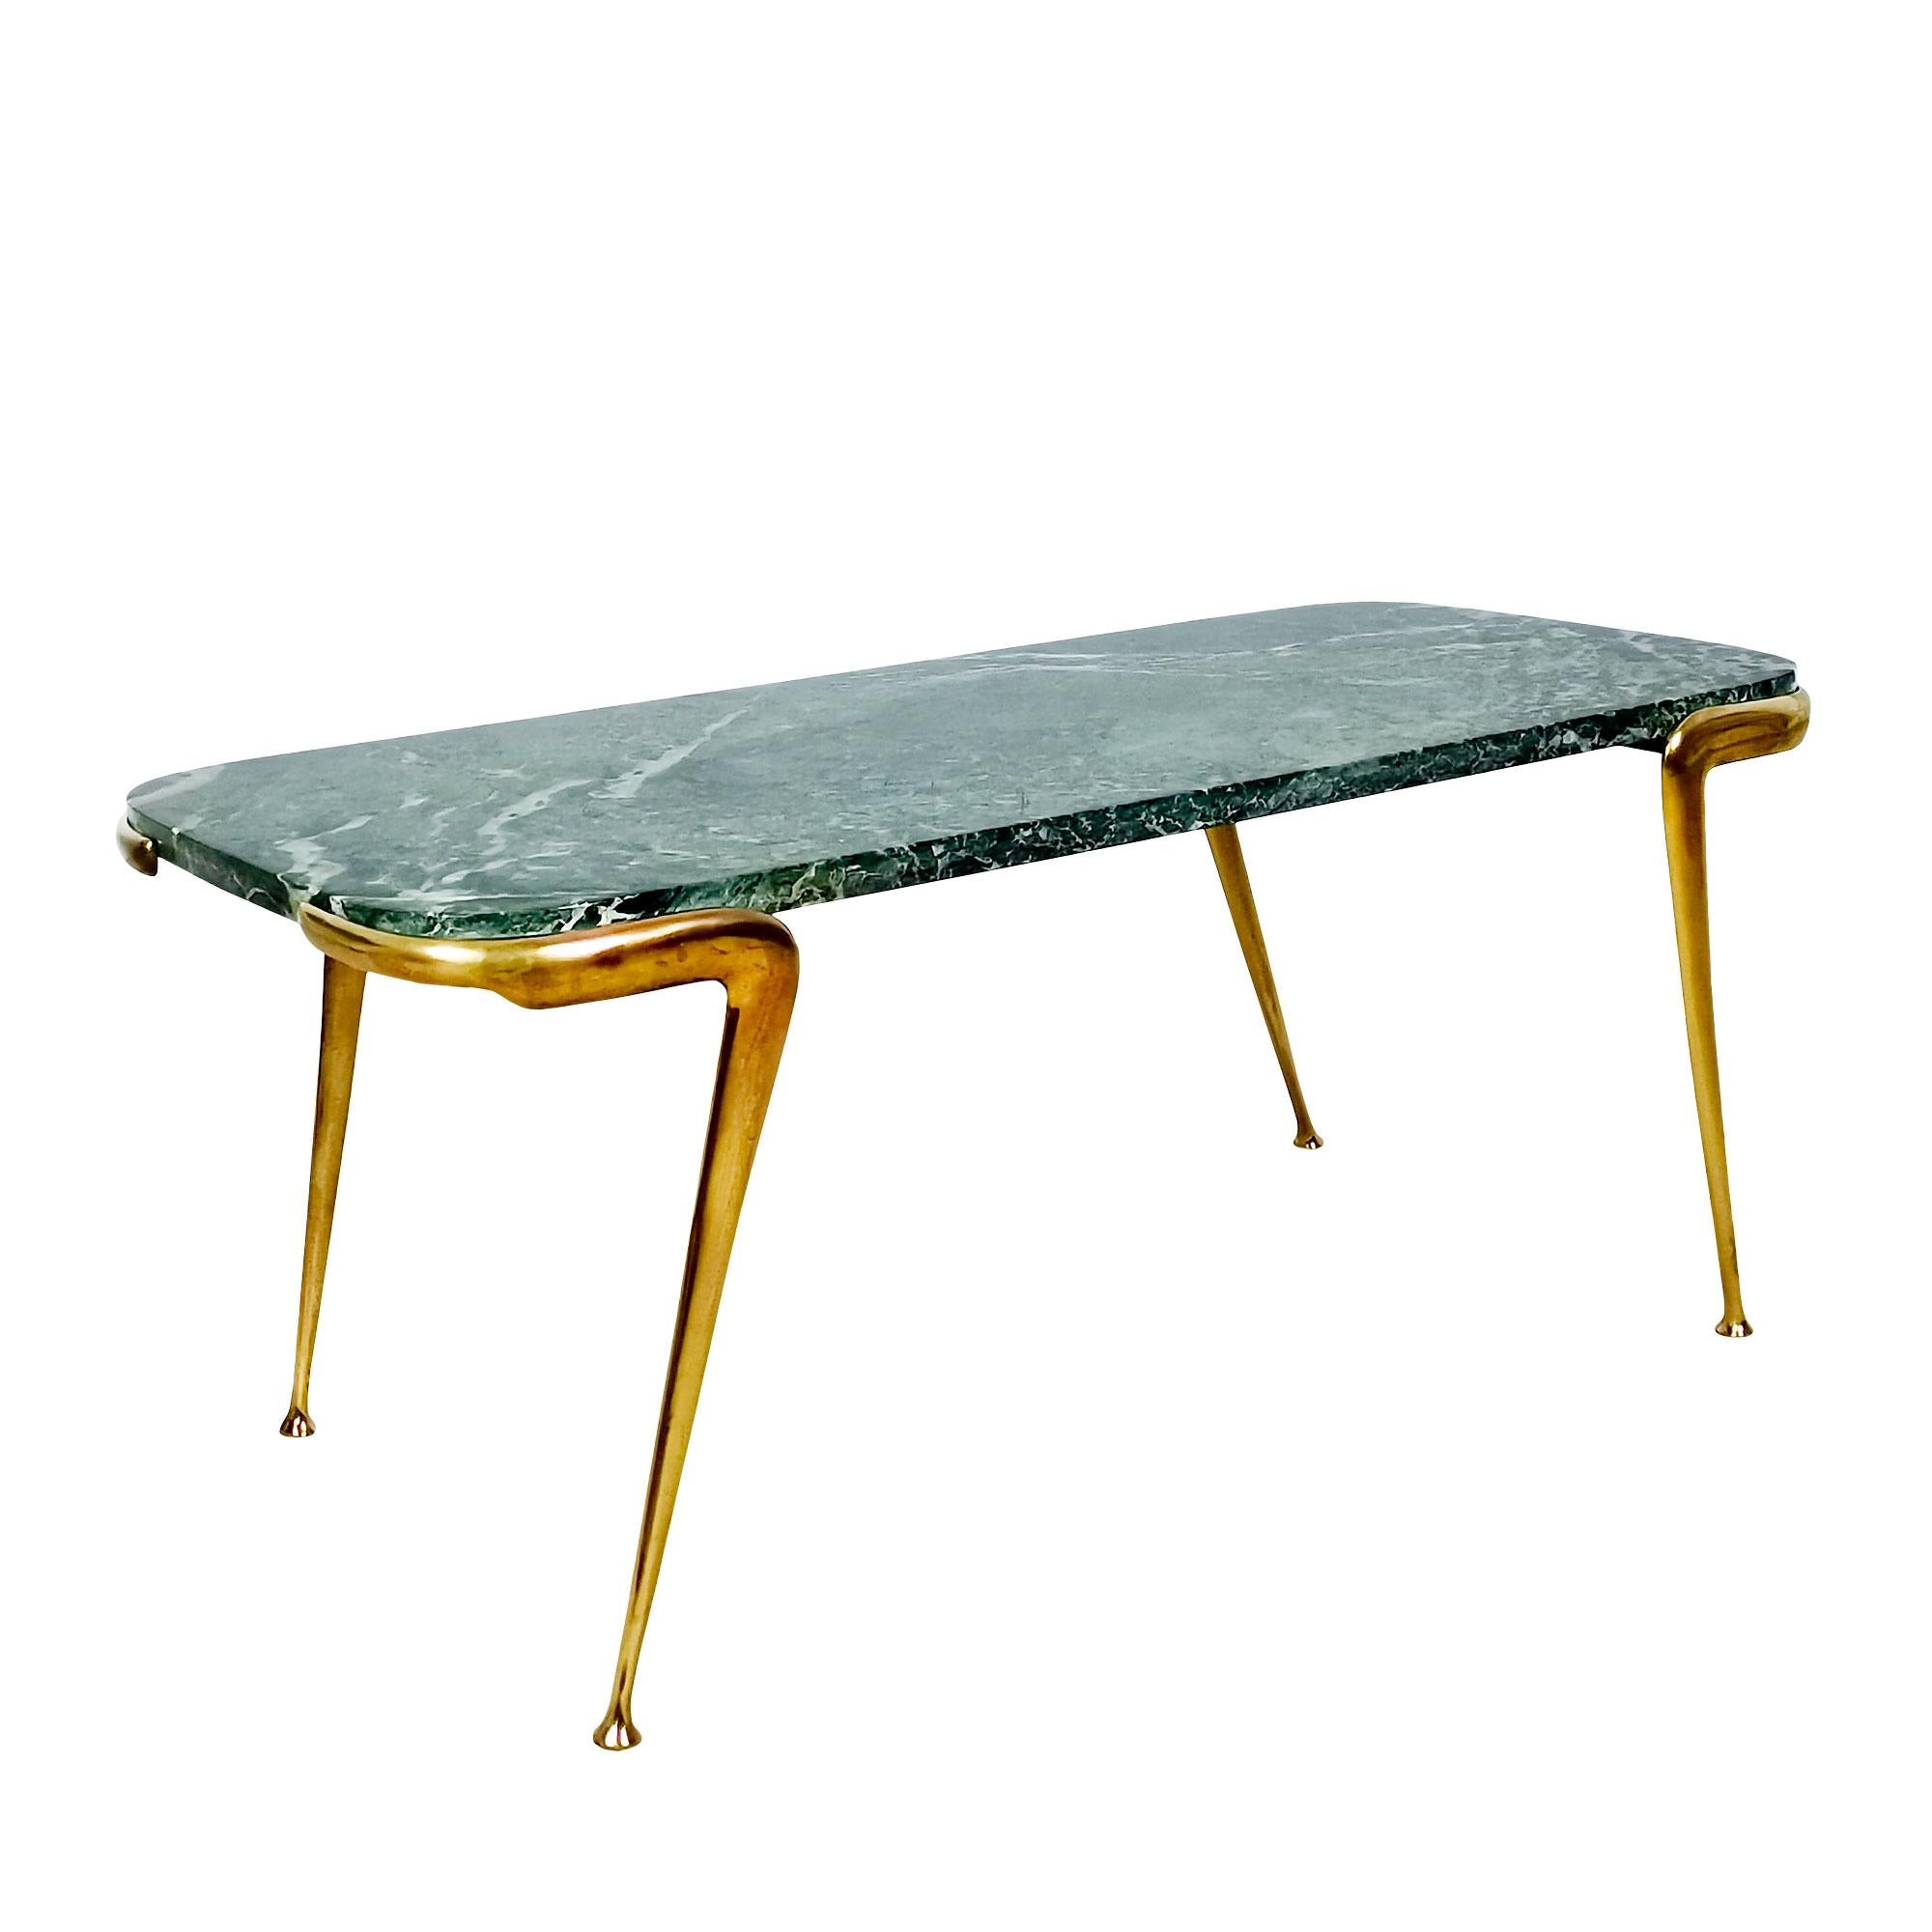 Coffee table with base in polished solid brass and steel tubes, top in celadon green veined marble.

Italy c.1940-45.